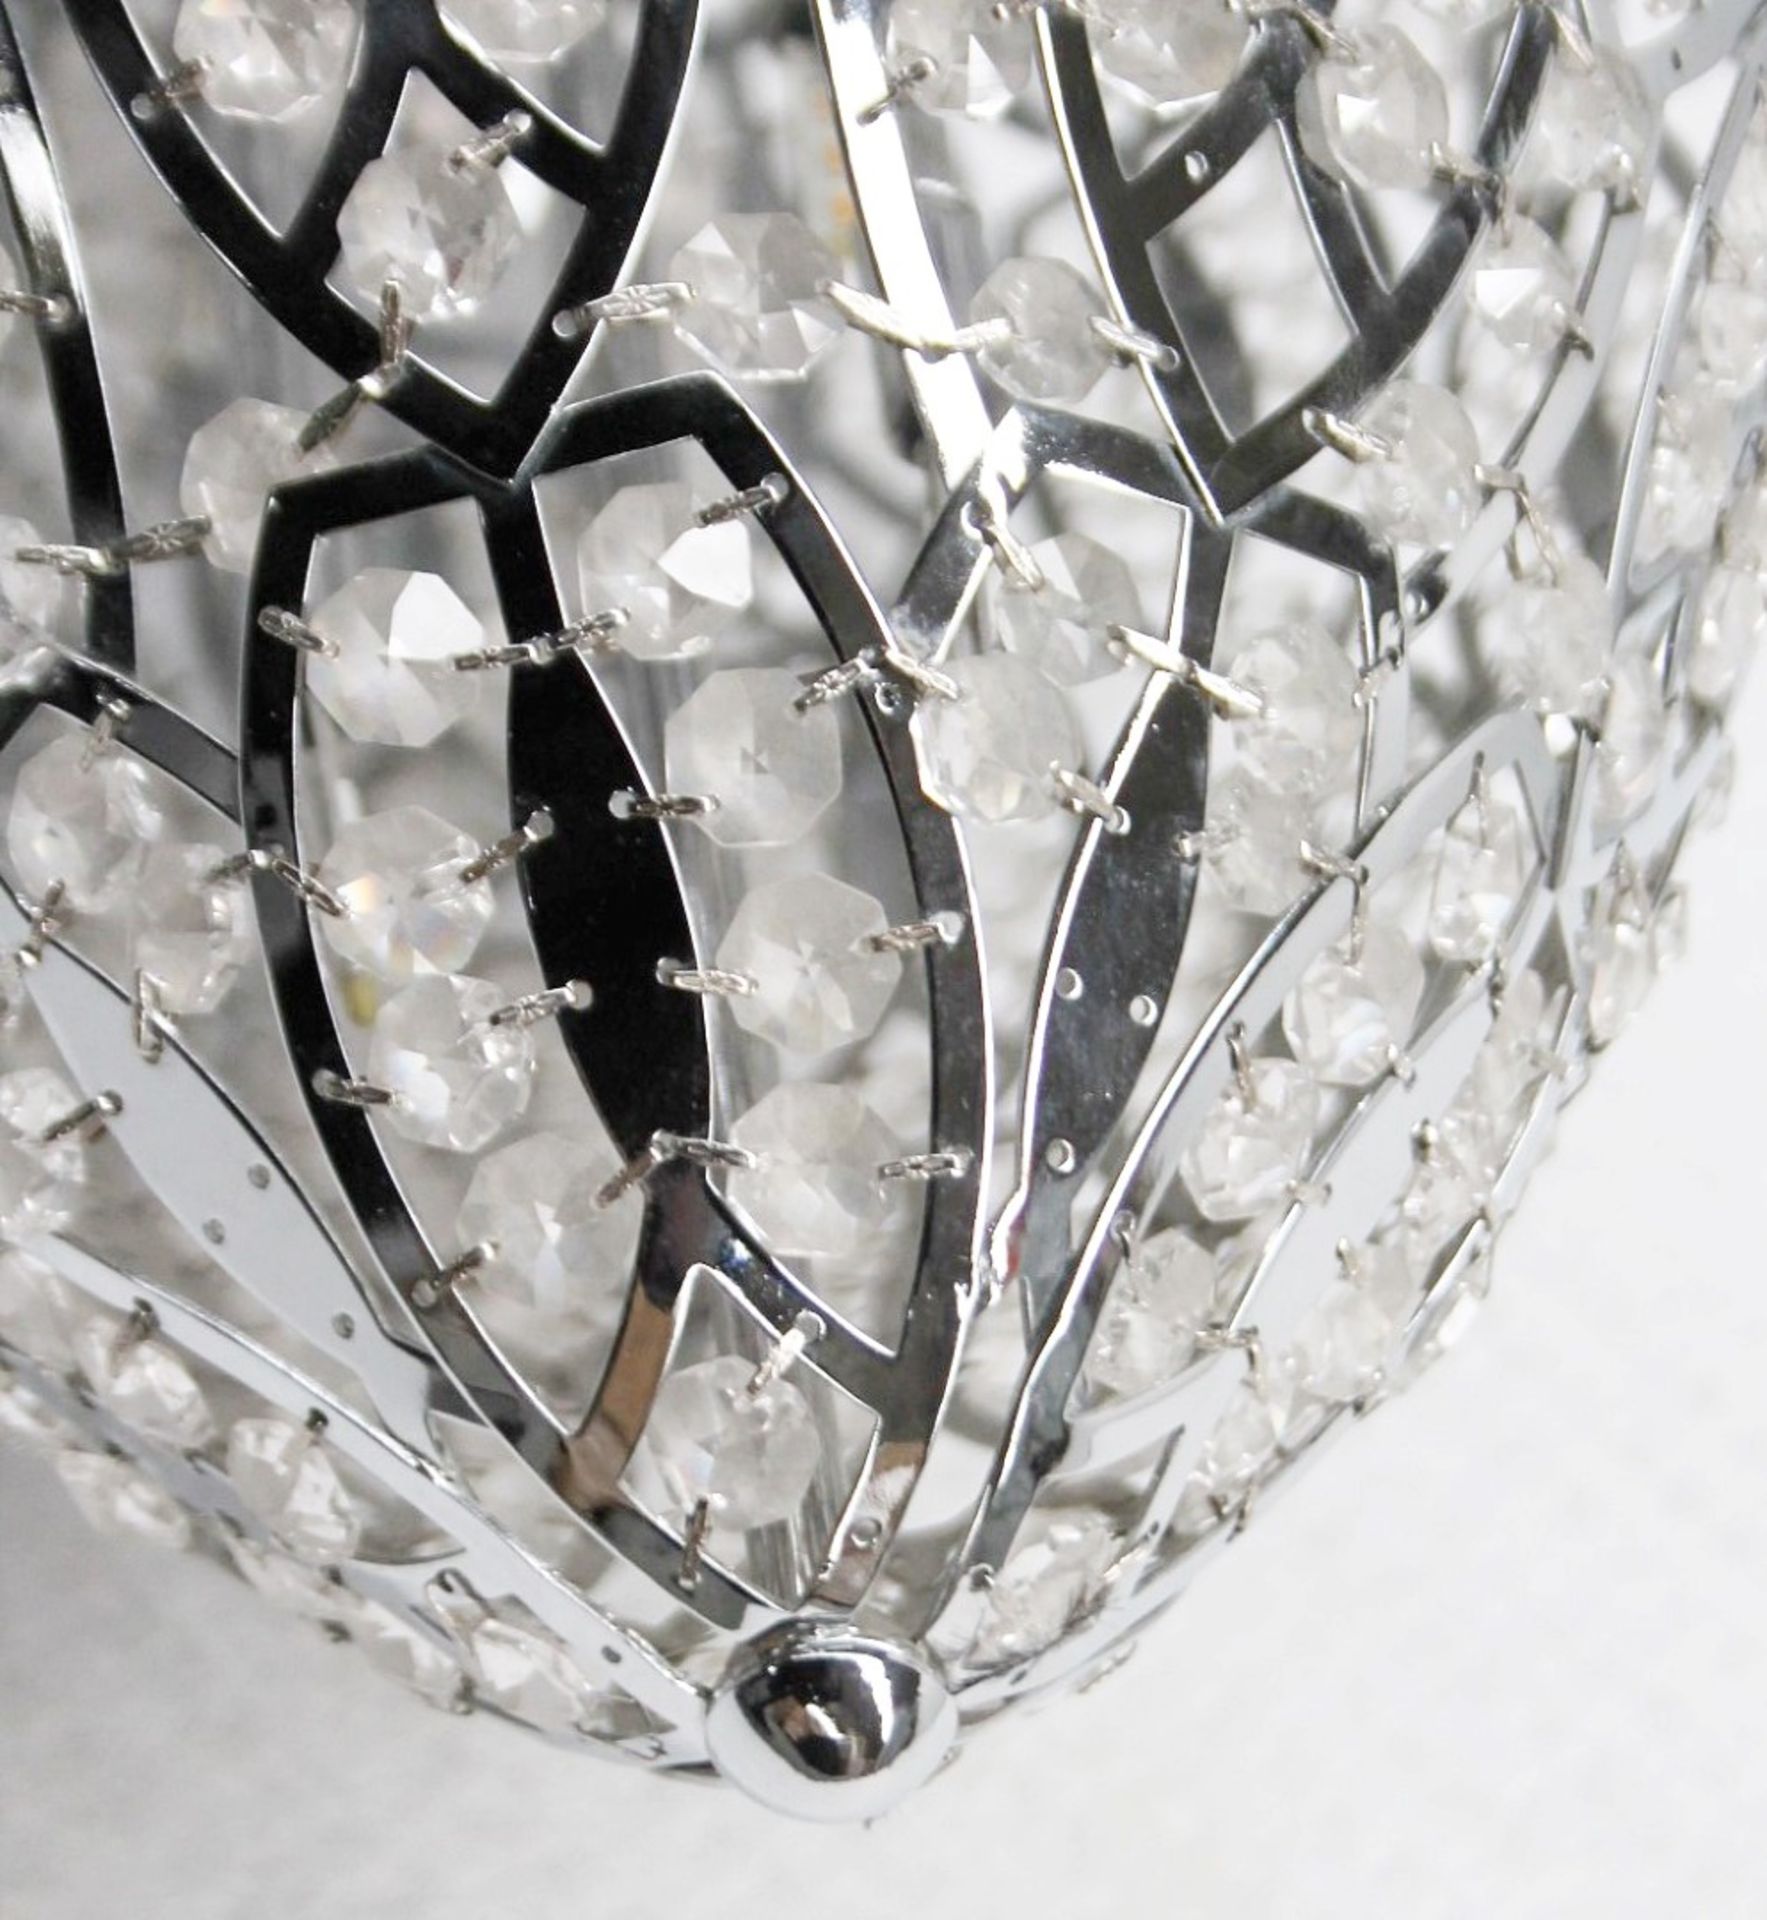 1 x High-end Italian LED Egg-Shaped Light Fitting Encrusted In Premium ASFOUR Crystals - RRP £4,000 - Image 8 of 9